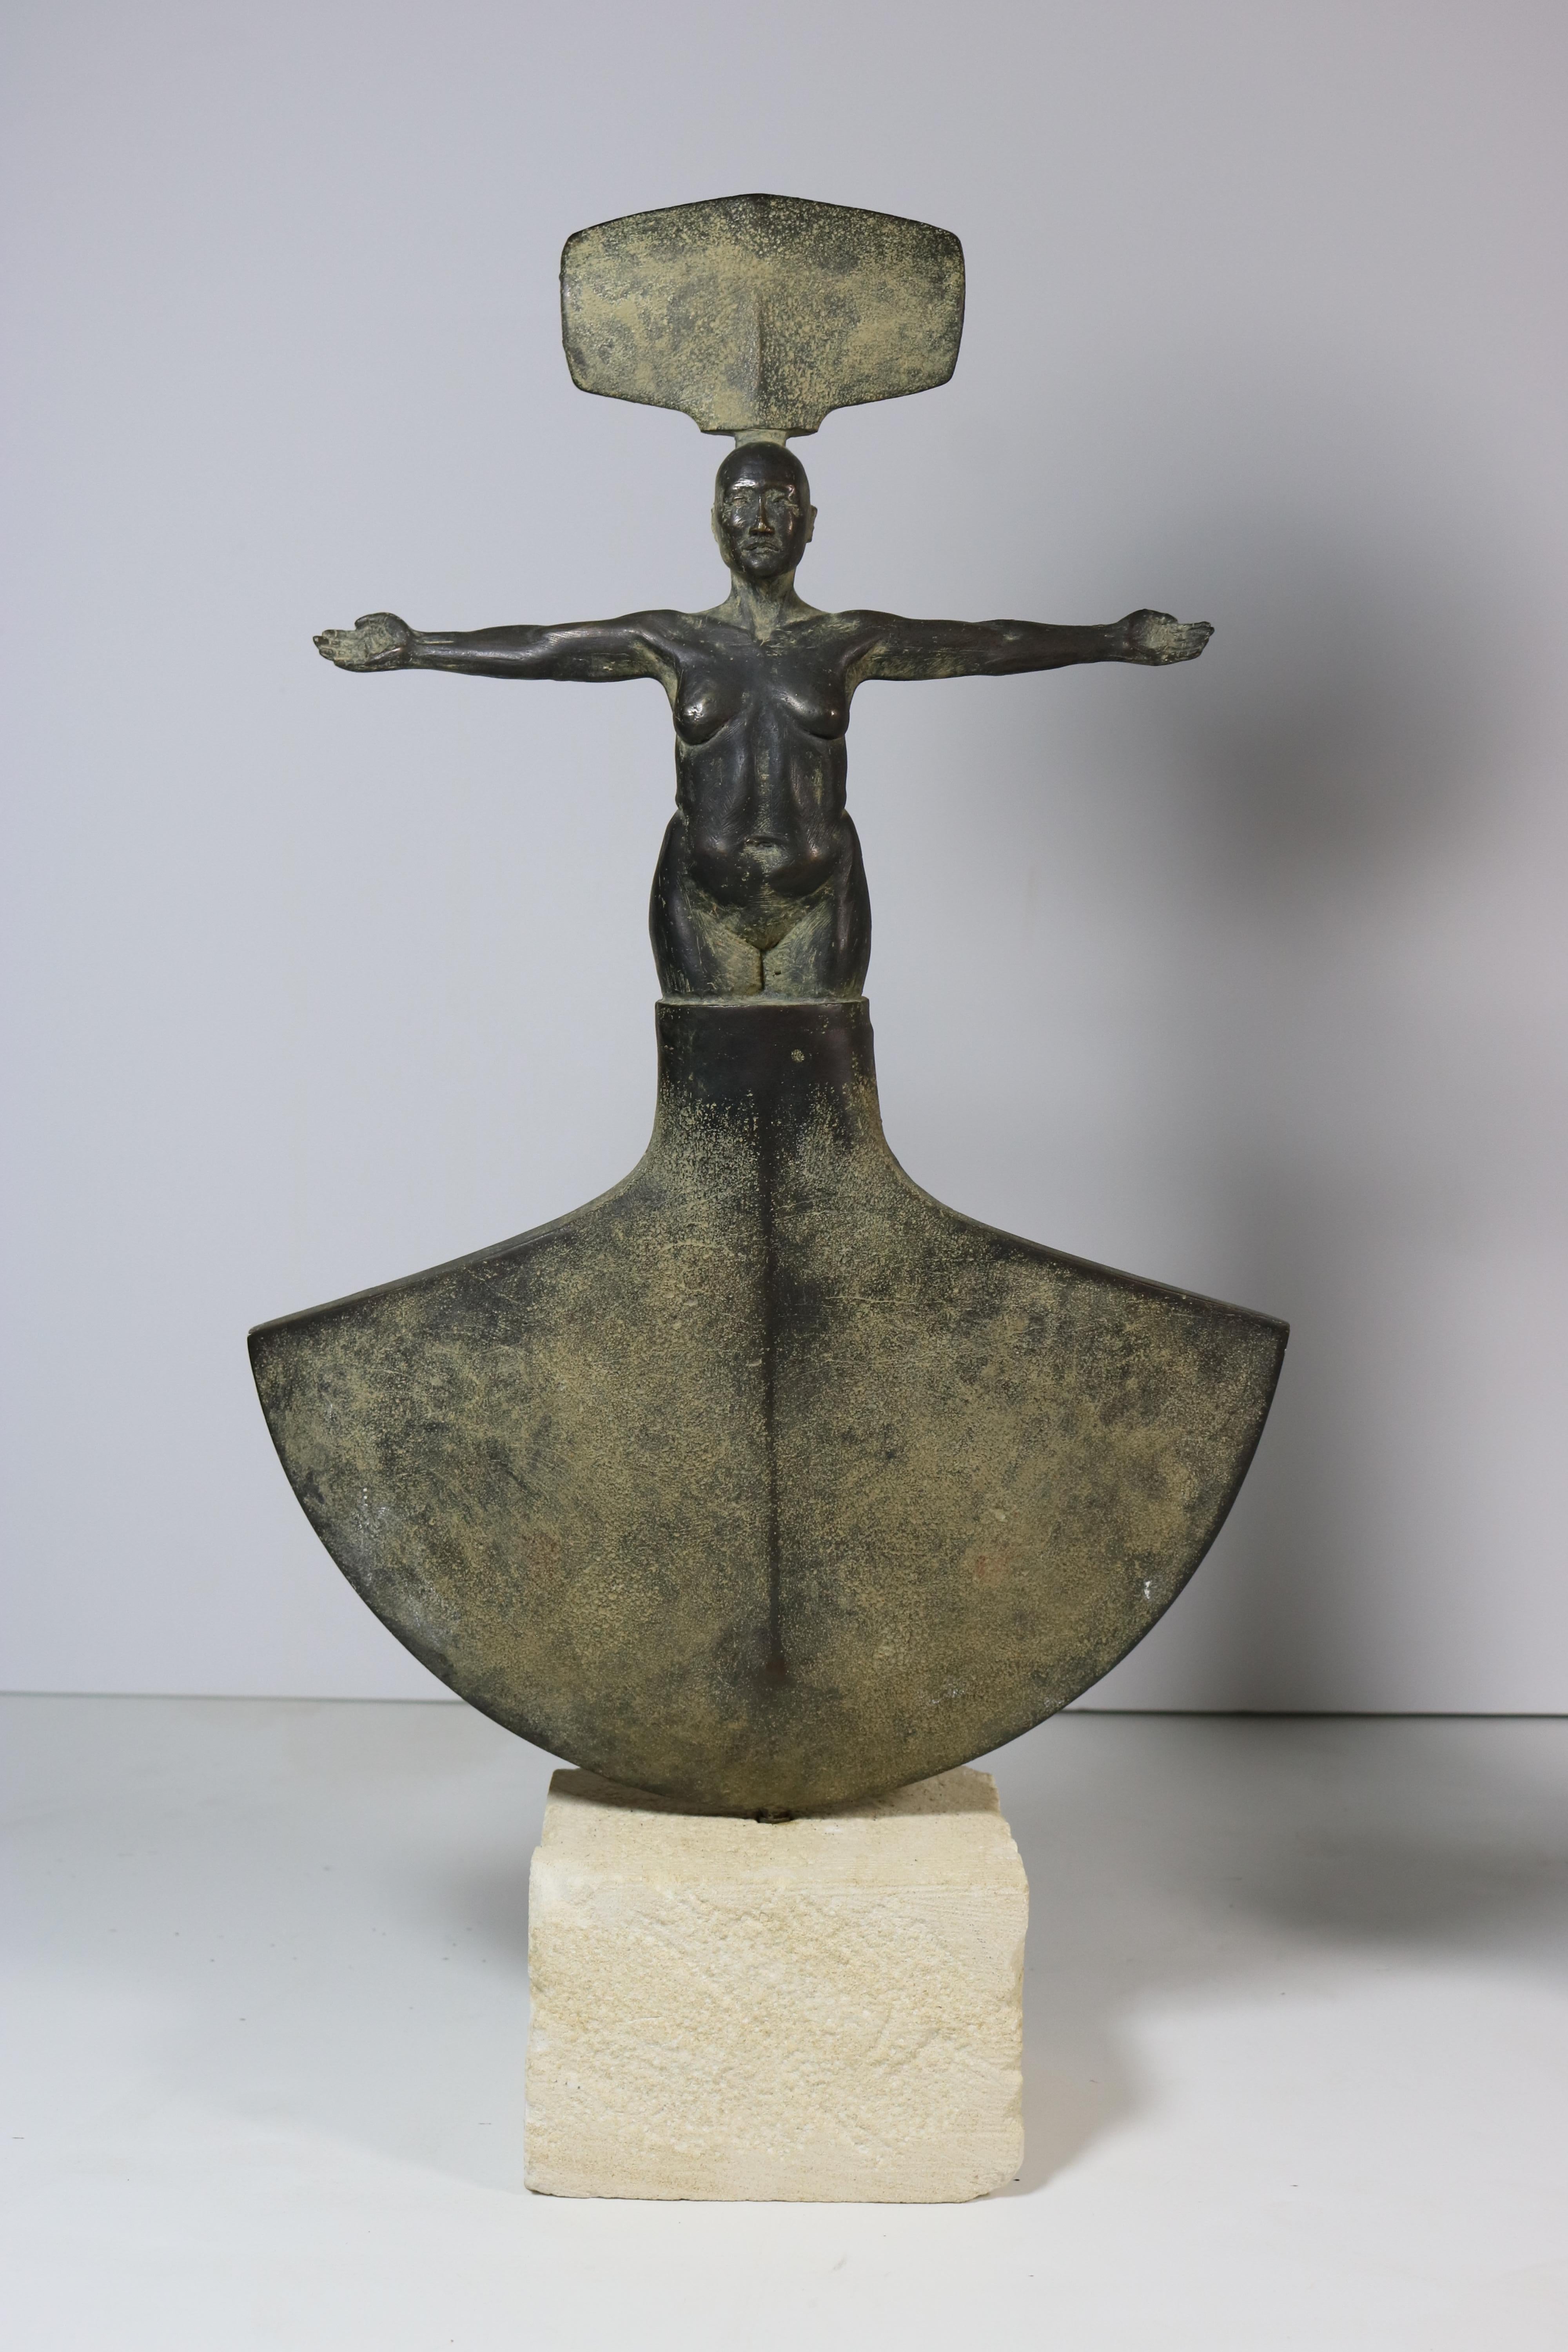 Combining primitive with the industrial, modern with ancient objects is where this noted California artist gets his inspiration. Jim Martin does allegorical works in bronze and steel.
His figurative sculptural forms are elegant, refined yet reflect